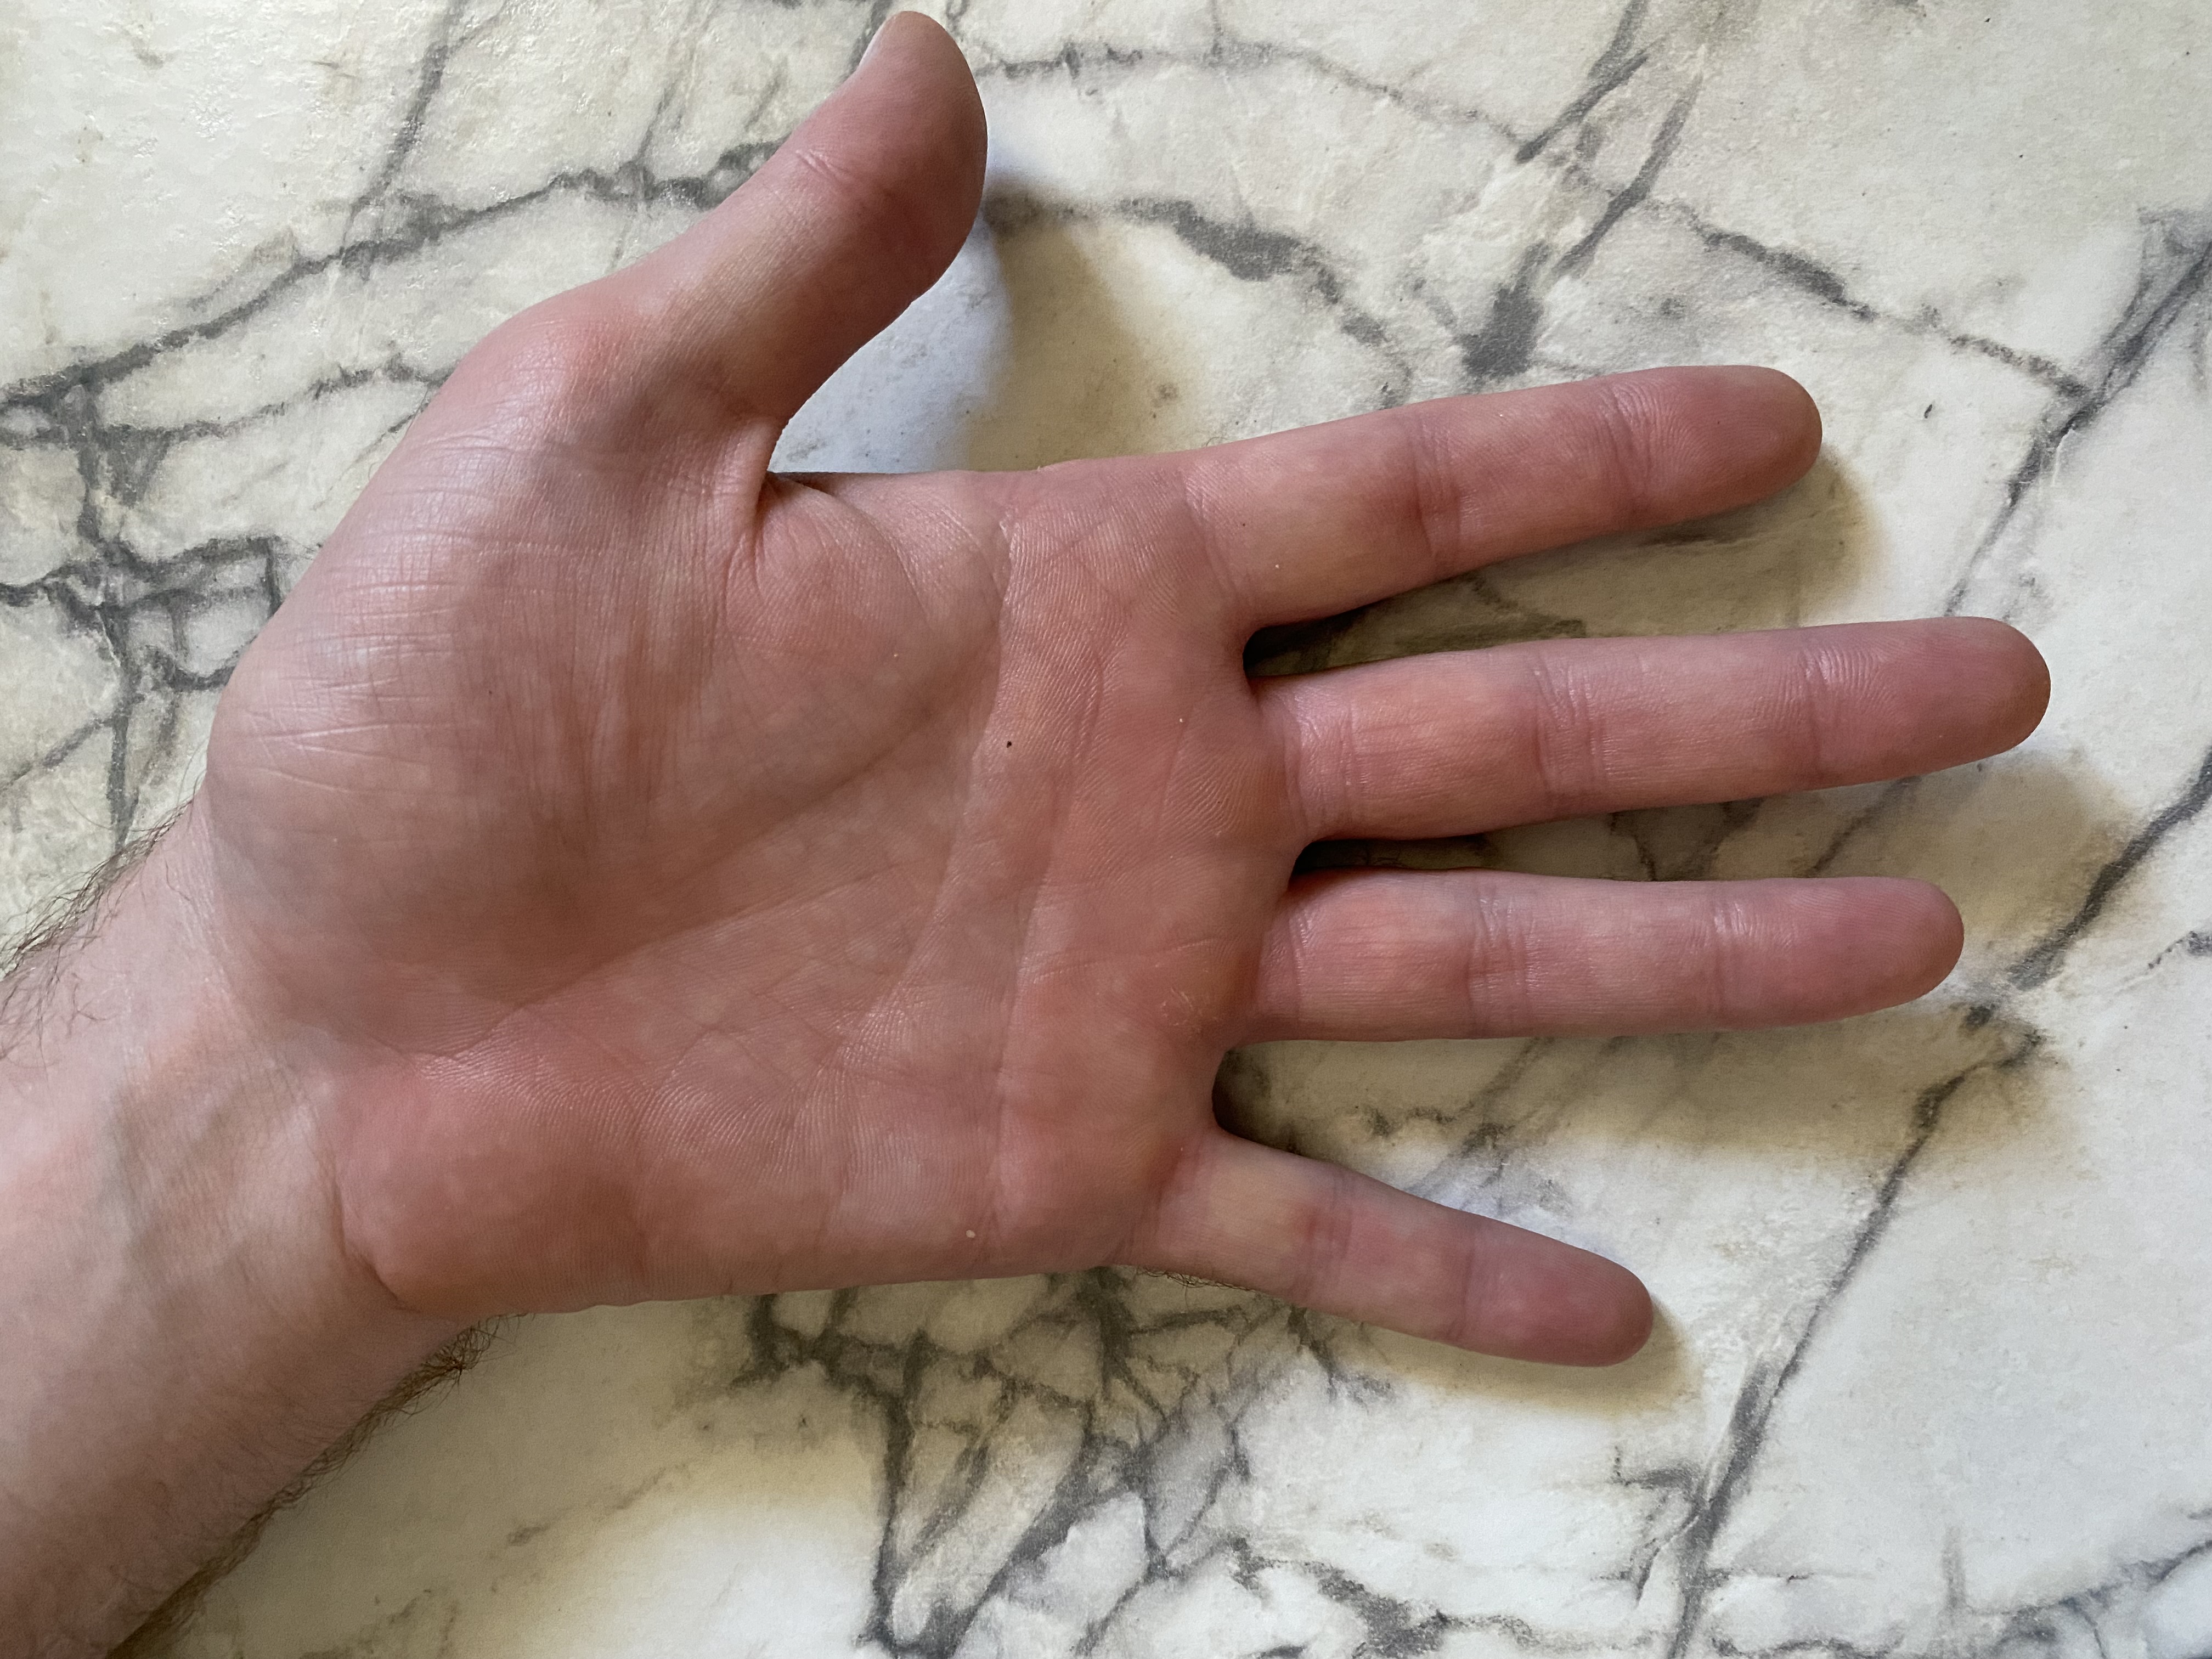 A close up of a man's right palm